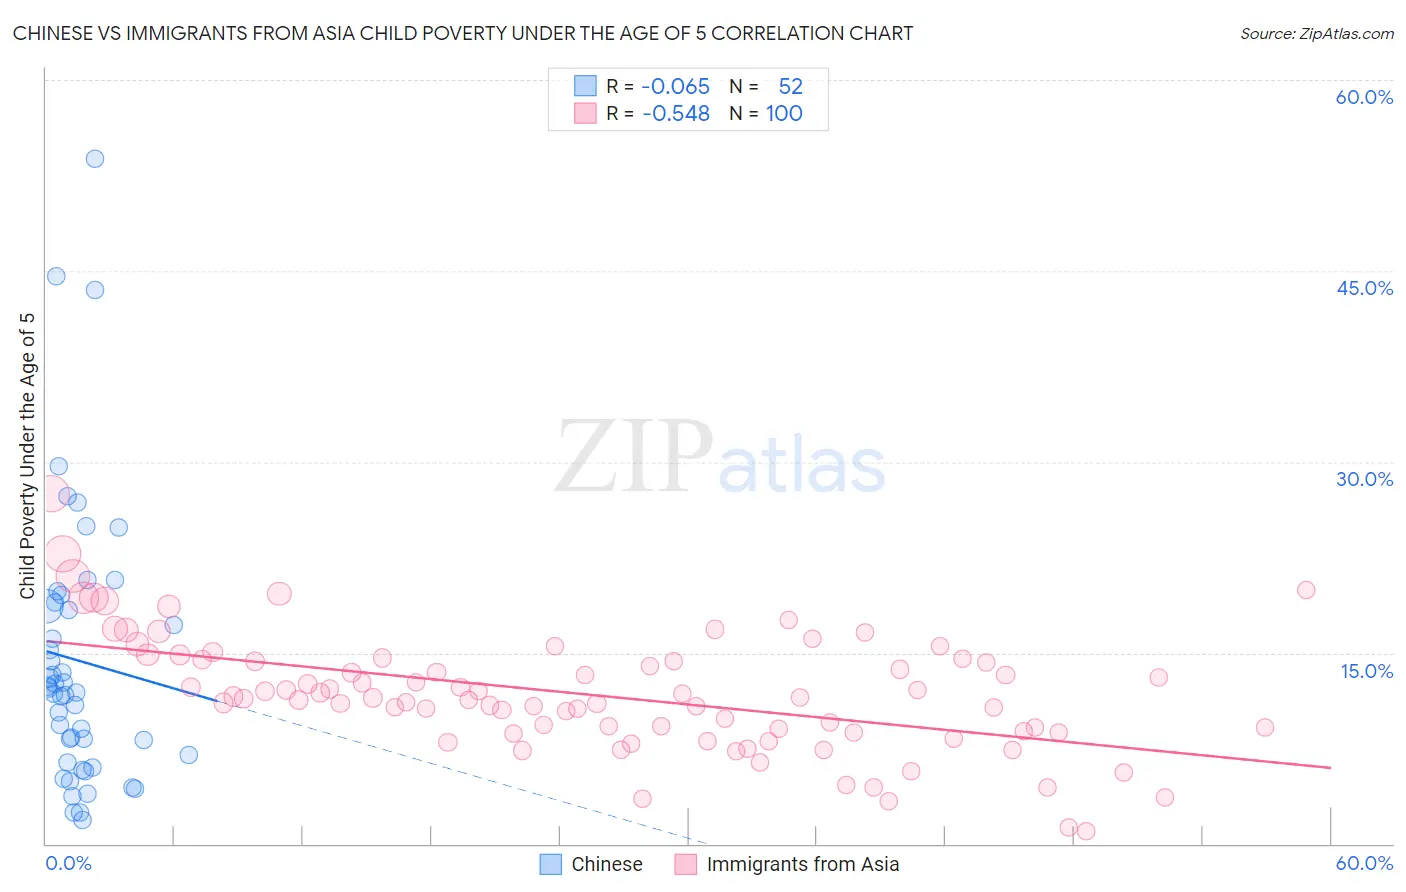 Chinese vs Immigrants from Asia Child Poverty Under the Age of 5